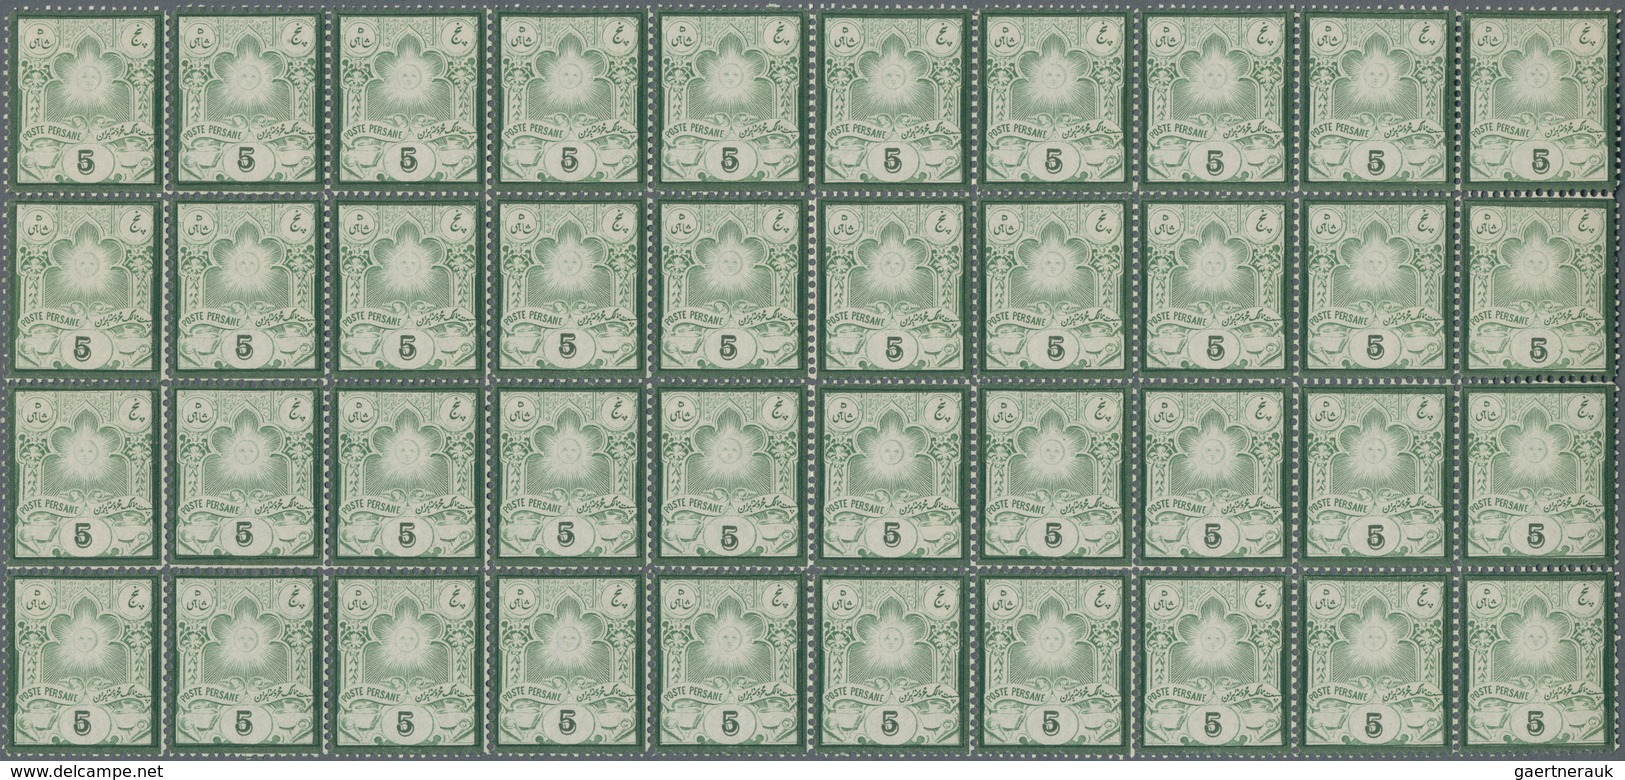 Iran: 1882, 5 Ch. Green Type I, 700 Stamps Mint Never Hinged In Large Blocks, A Very Scarce Offer An - Iran